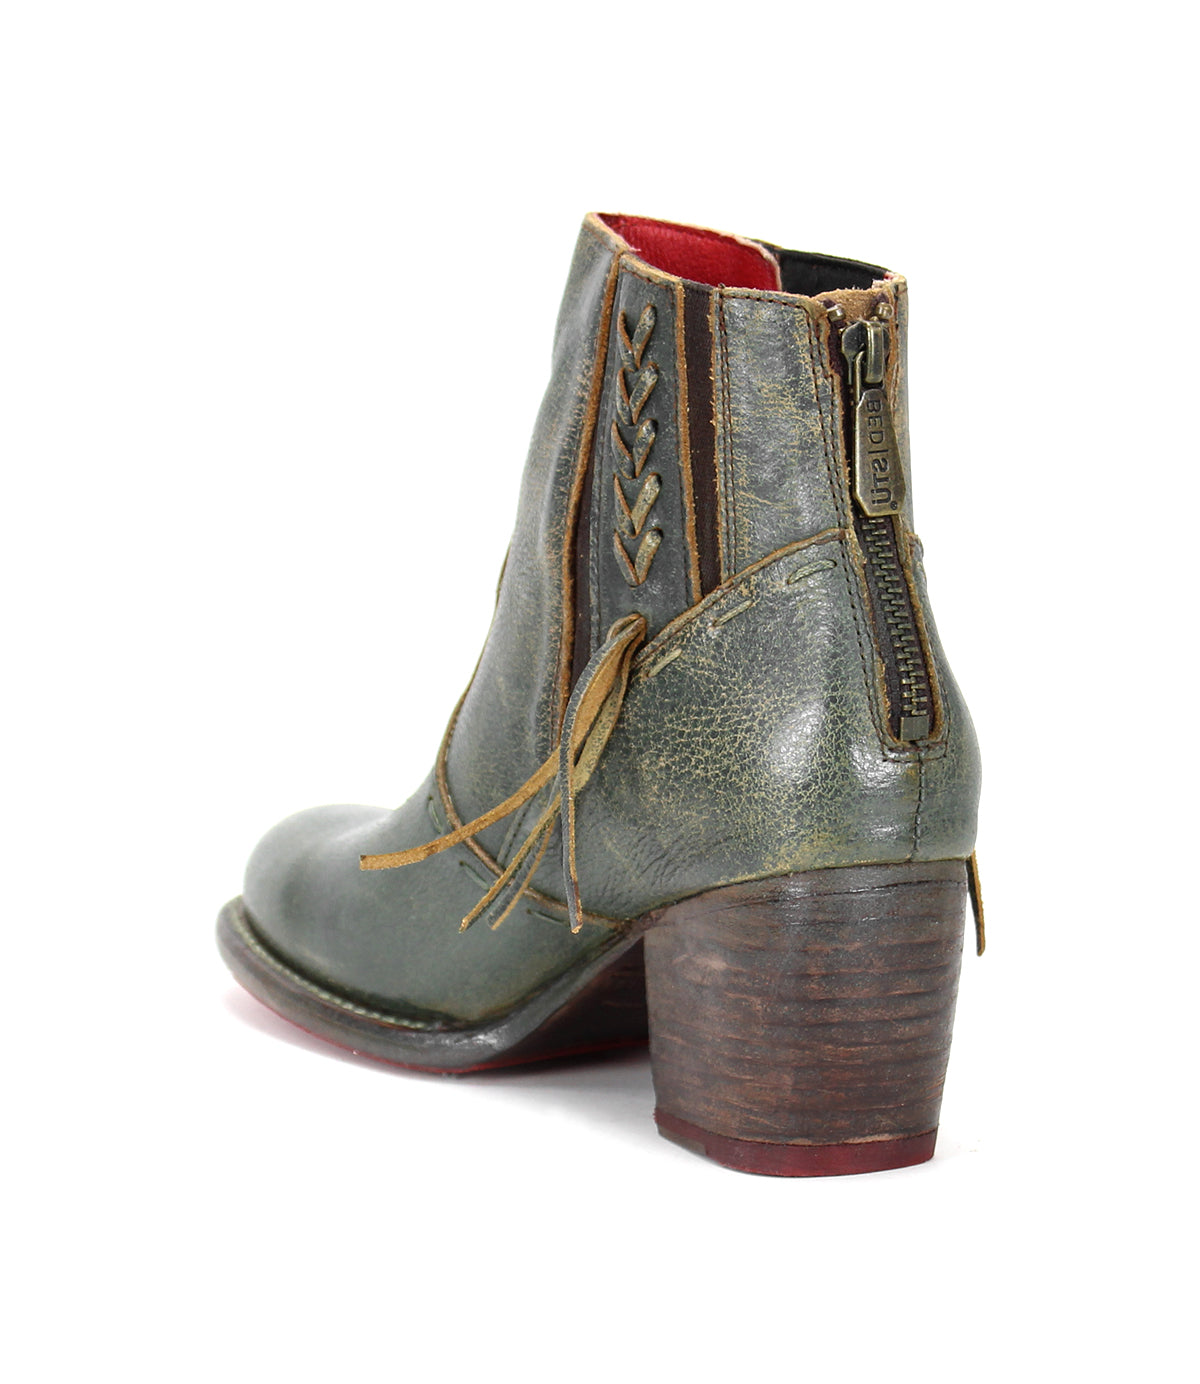 A women's green leather ankle boot with a zipper, called the Celestine by Bed Stu.